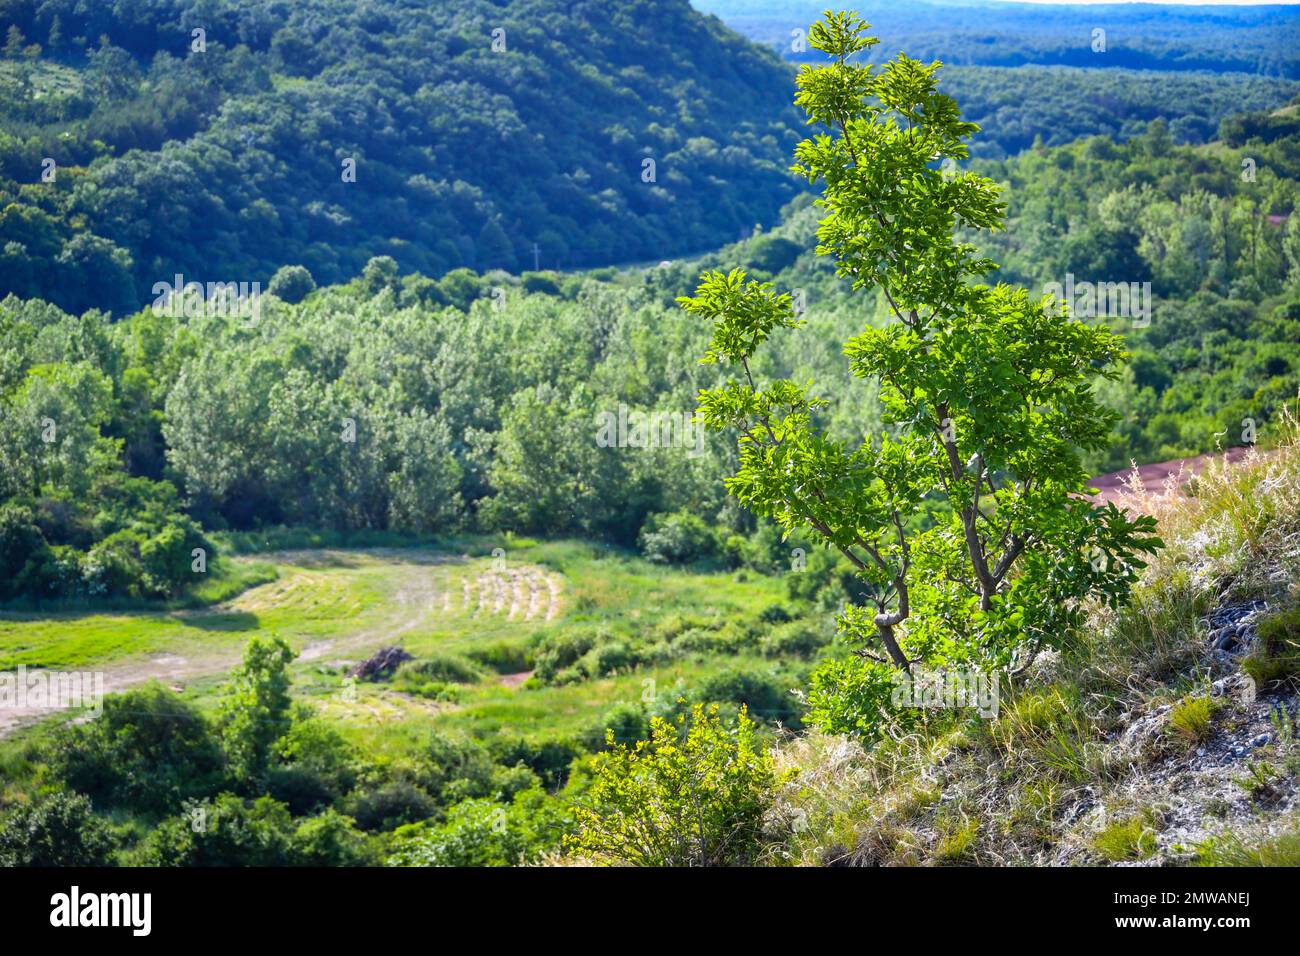 Small sapling on top of a hill in front of a forest valley Stock Photo